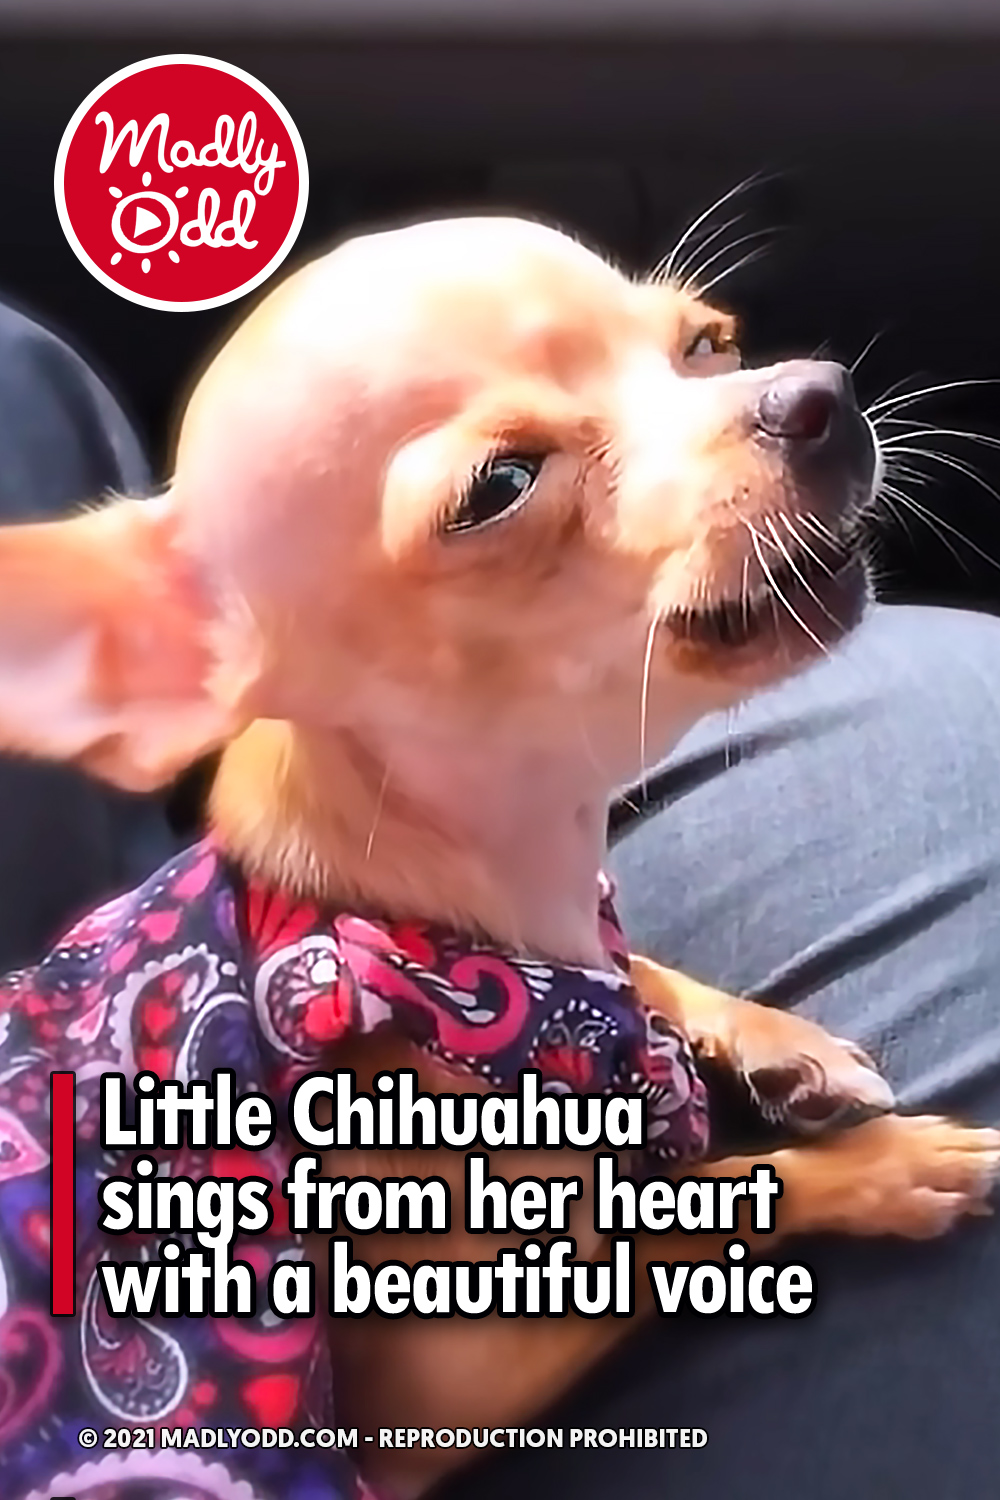 Little Chihuahua sings from her heart with a beautiful voice